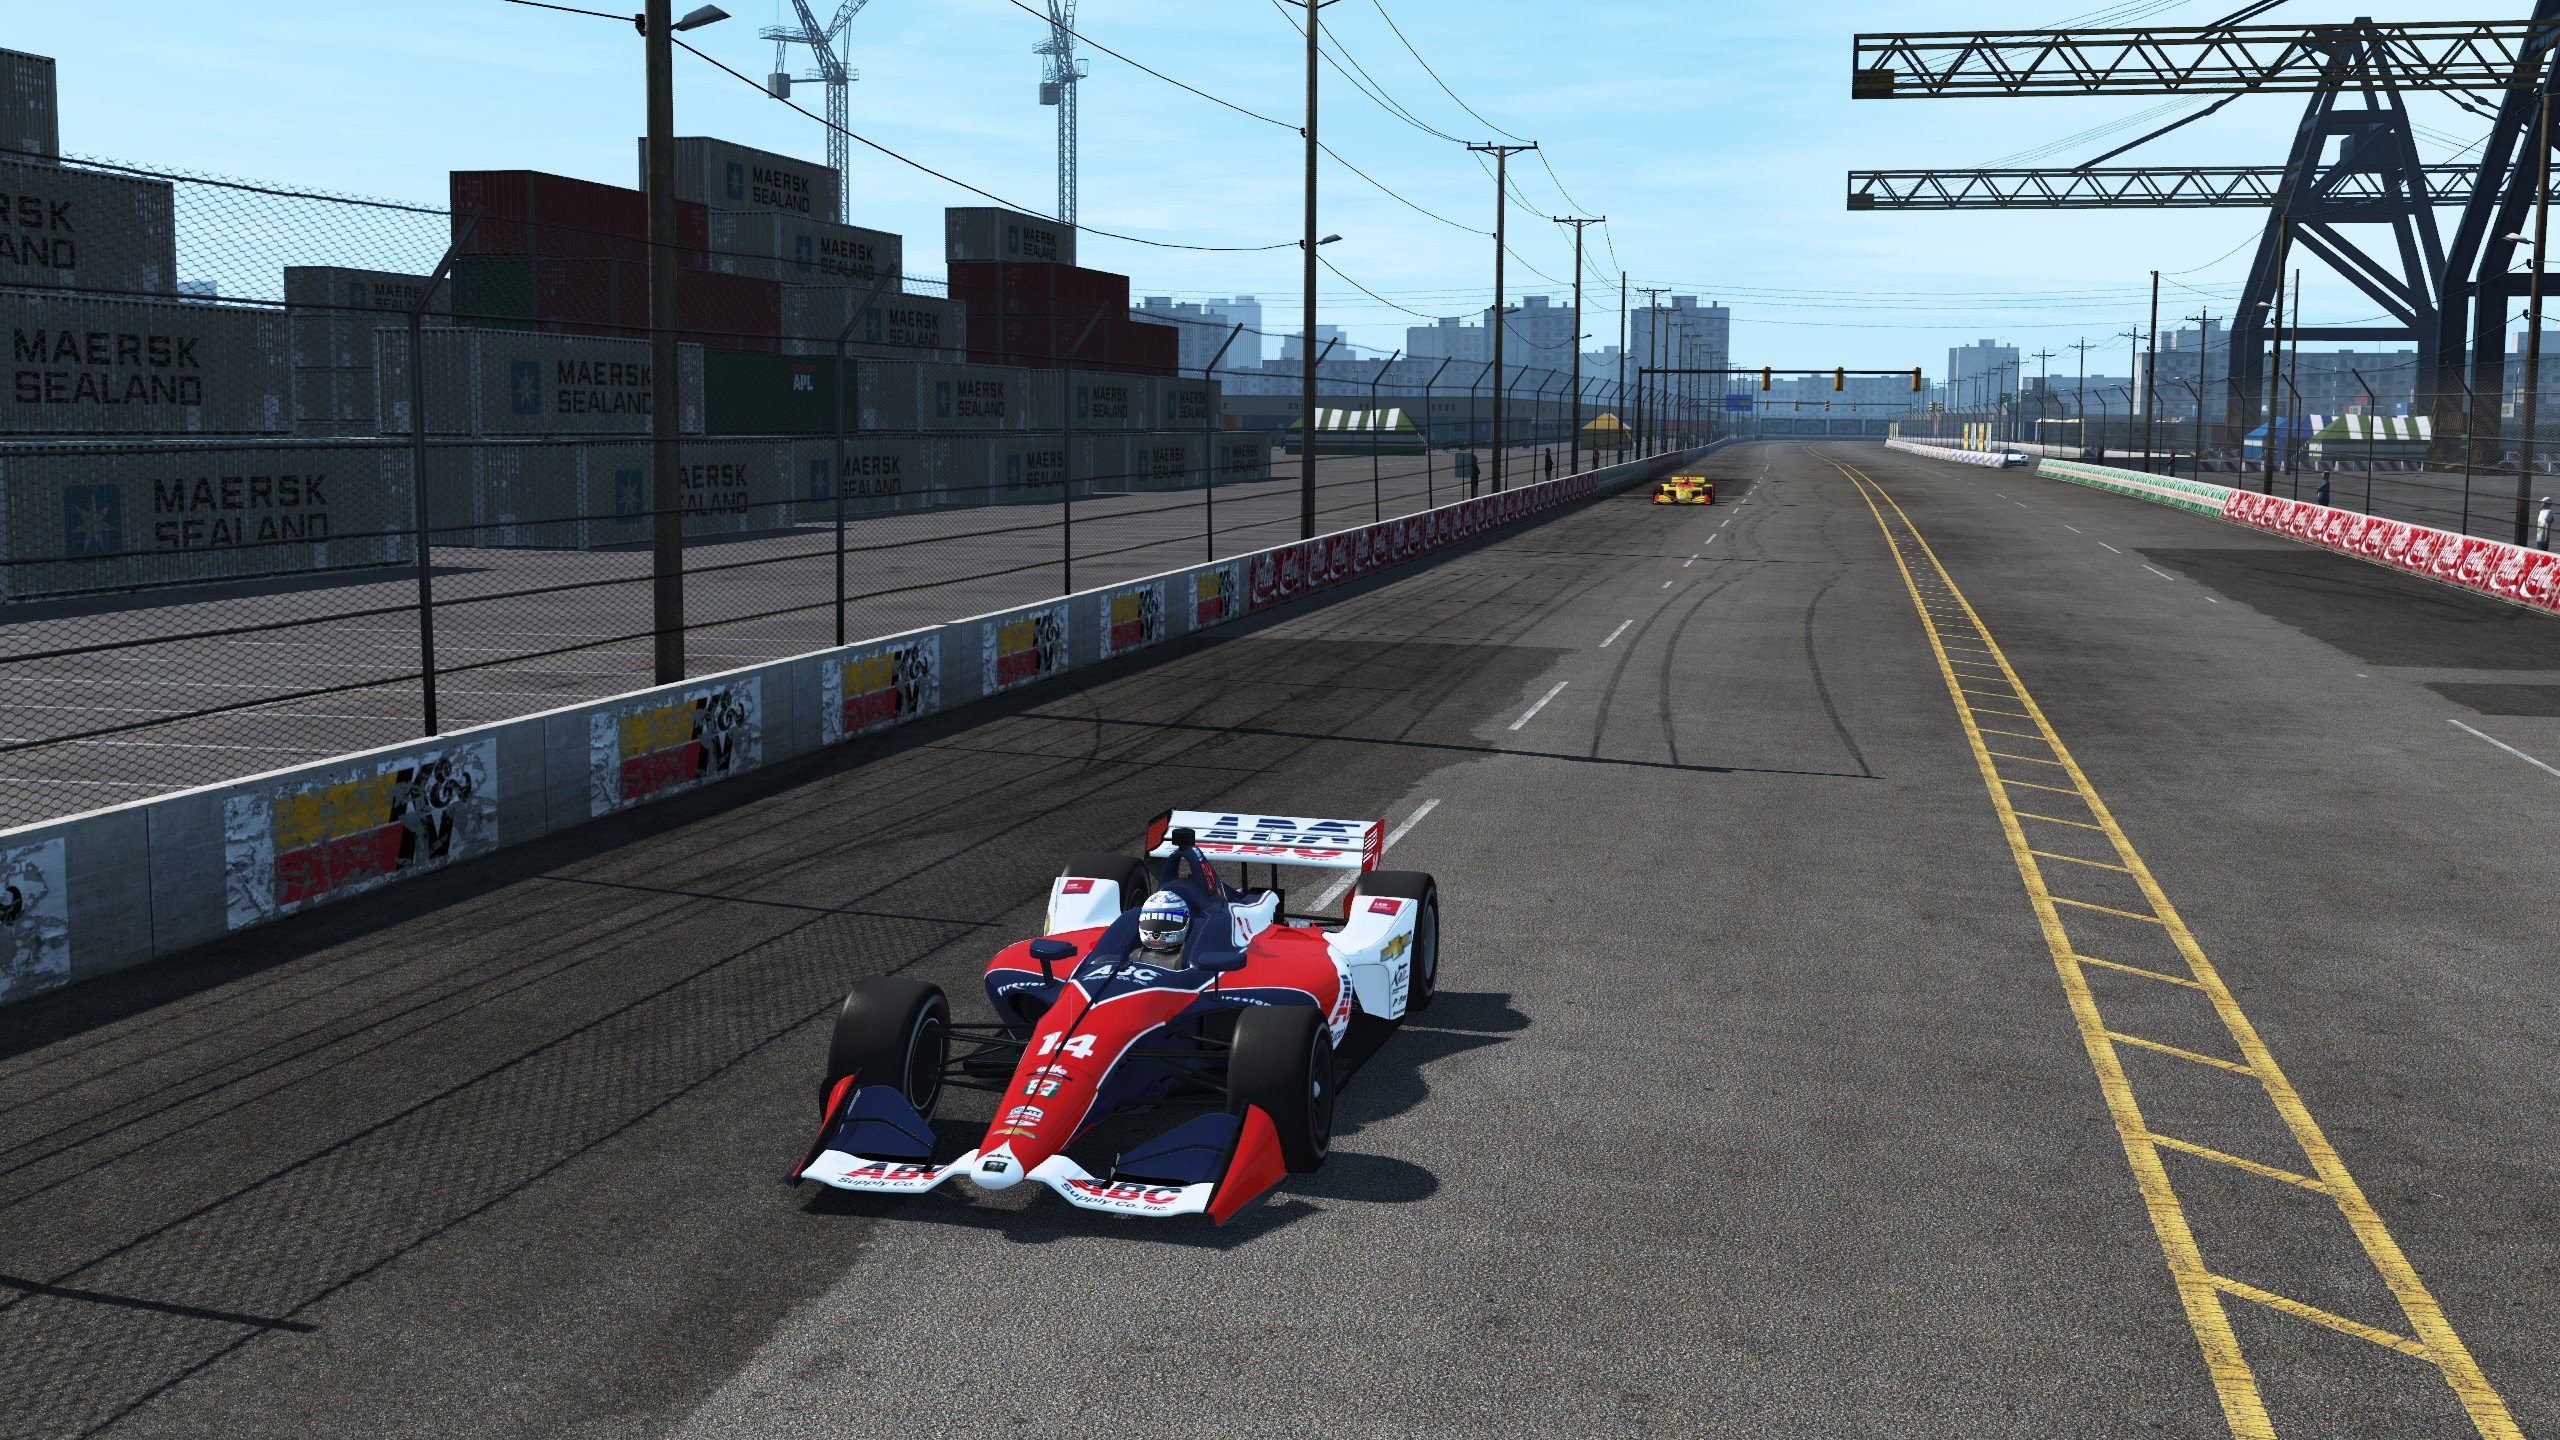 More information about "rFactor 2: 2019 IndyCar Series 500 by IndyCar Team & Apex Modding"